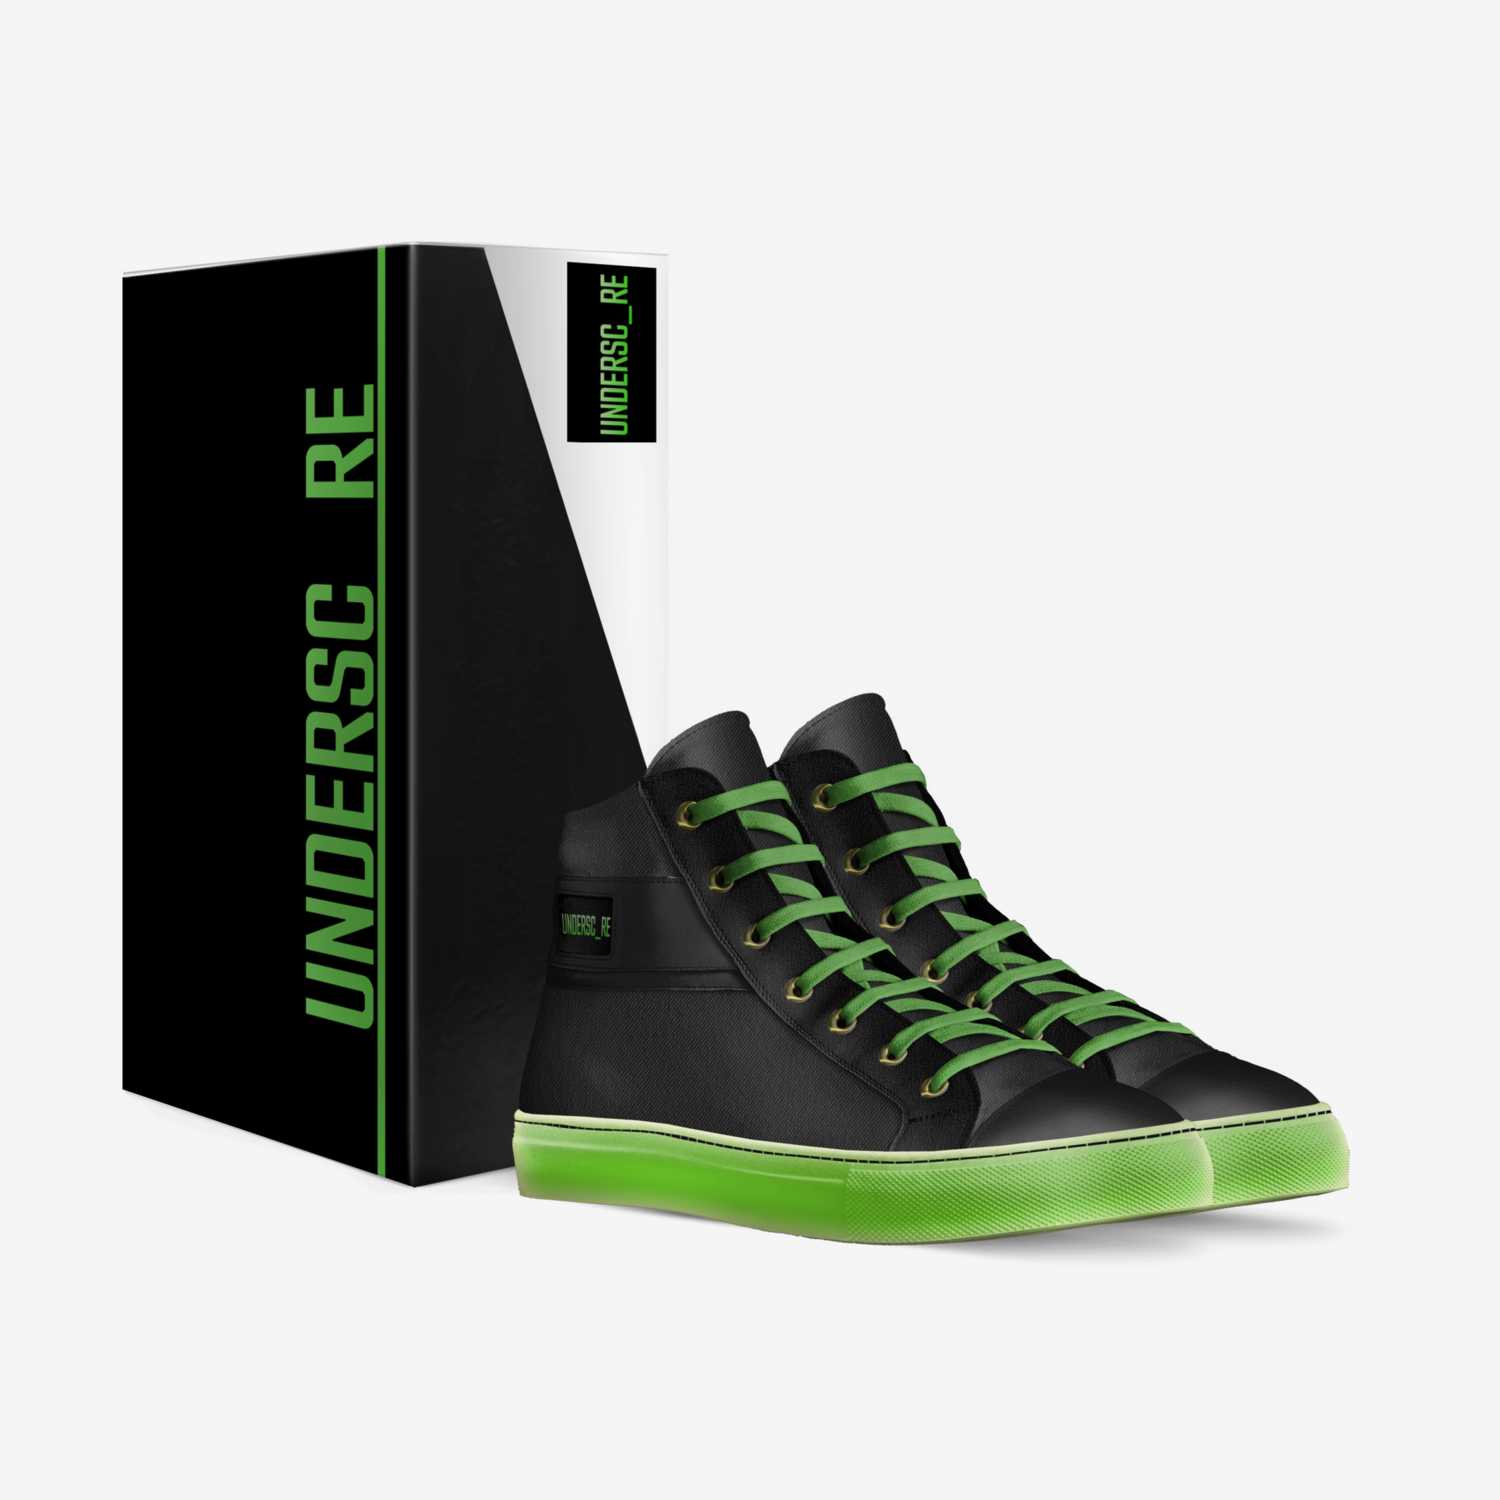 Underscore custom made in Italy shoes by Adam Taylor | Box view